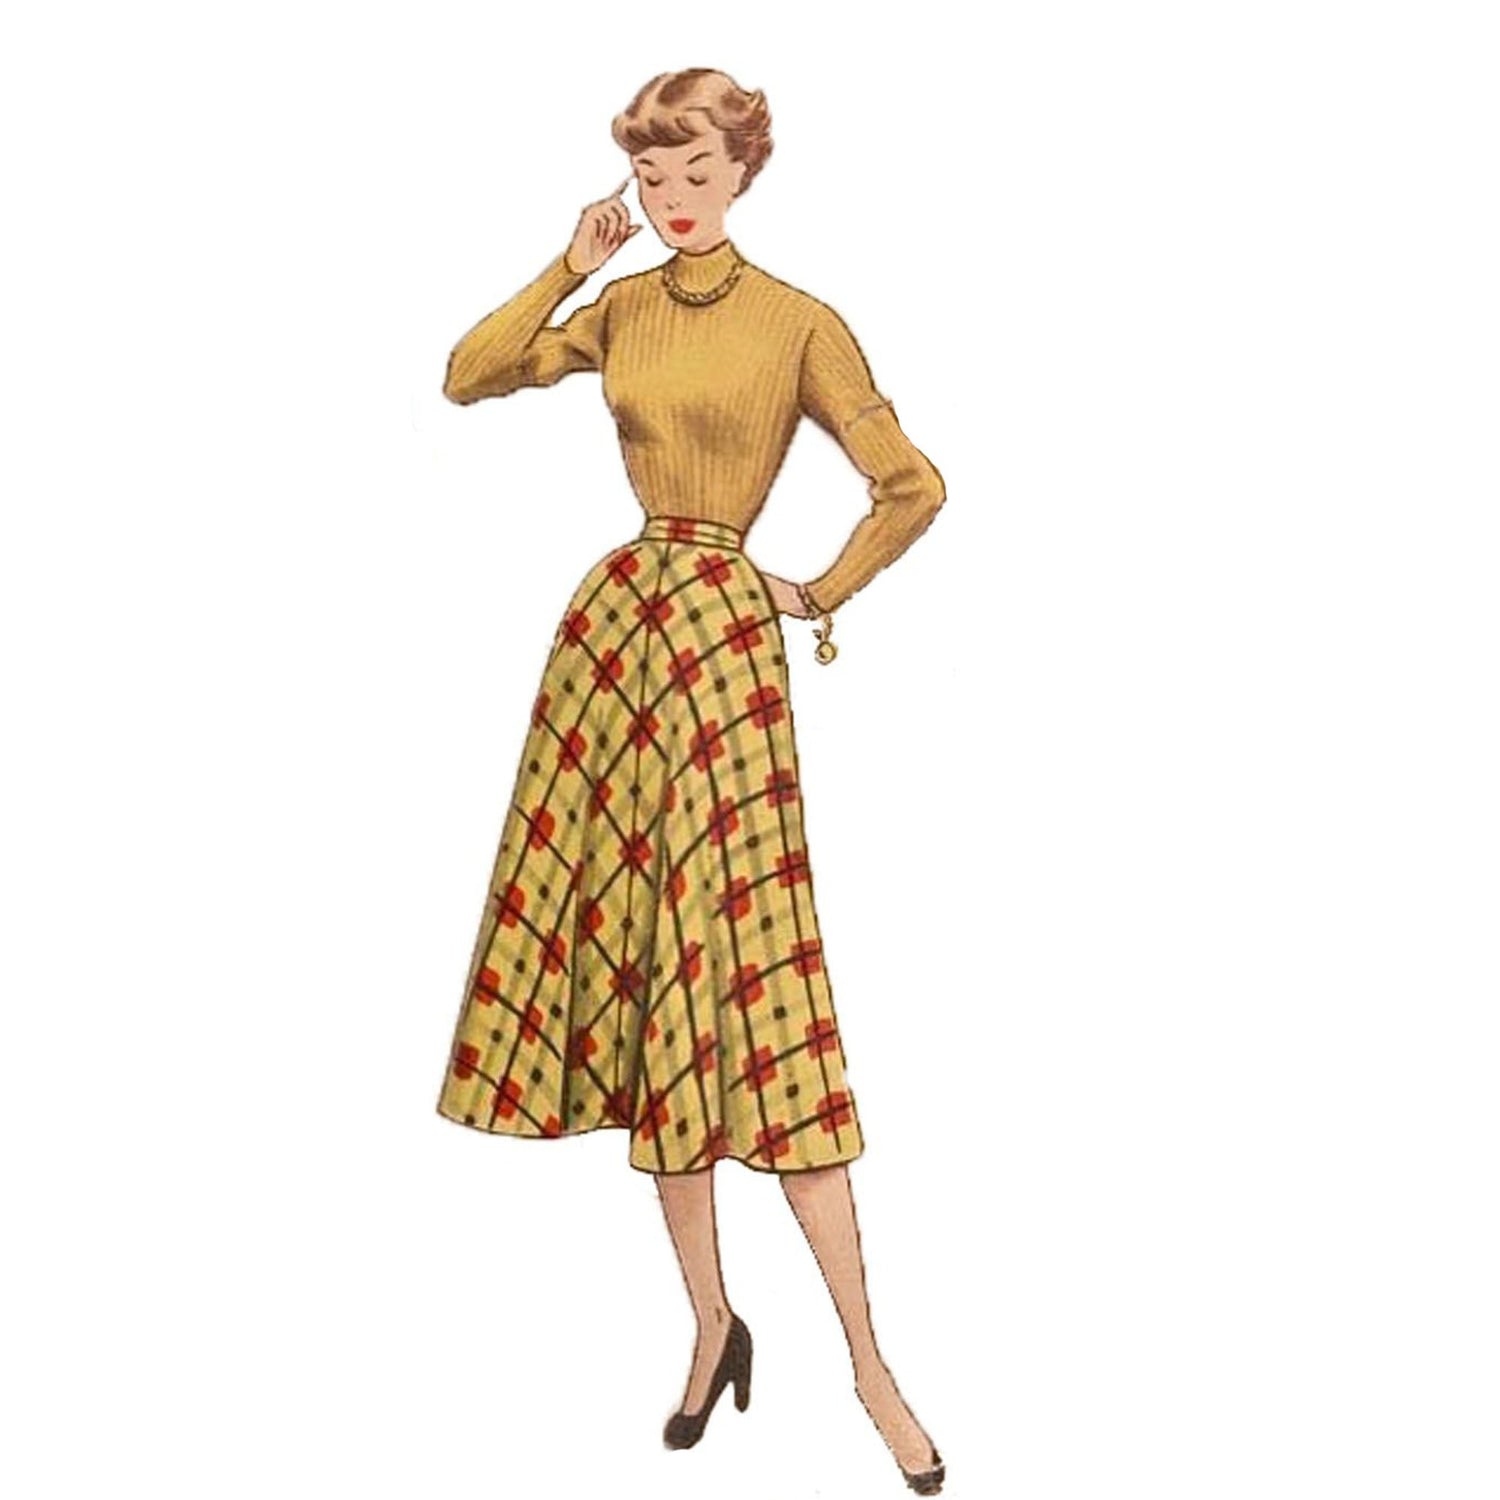 Model wearing 1950s waistcoat and skirt made from Economy Design E45 pattern